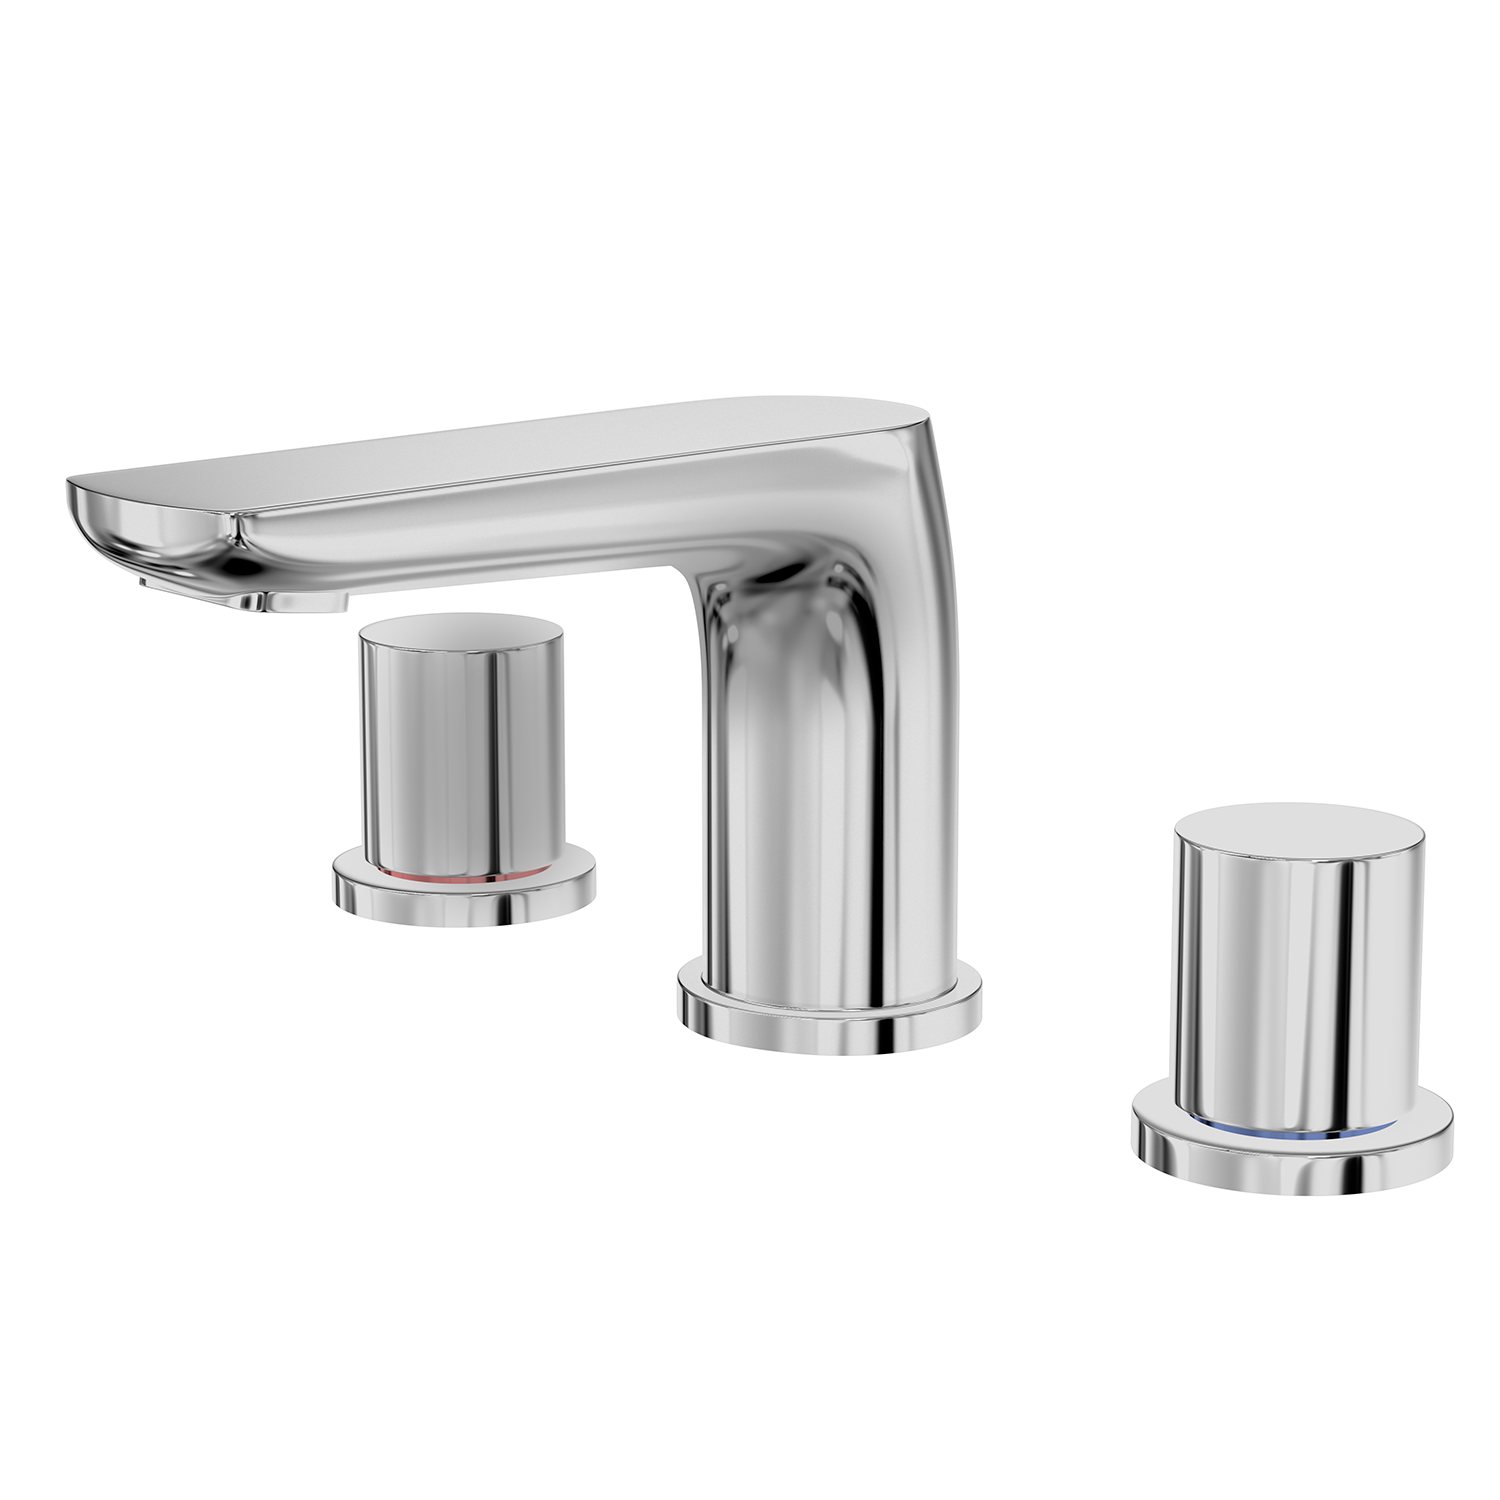 DAX Two Handle Bathroom Faucet, Brass Body, Chrome Finish, Inches, 8 x 3-3/8 (DAX-8216C)